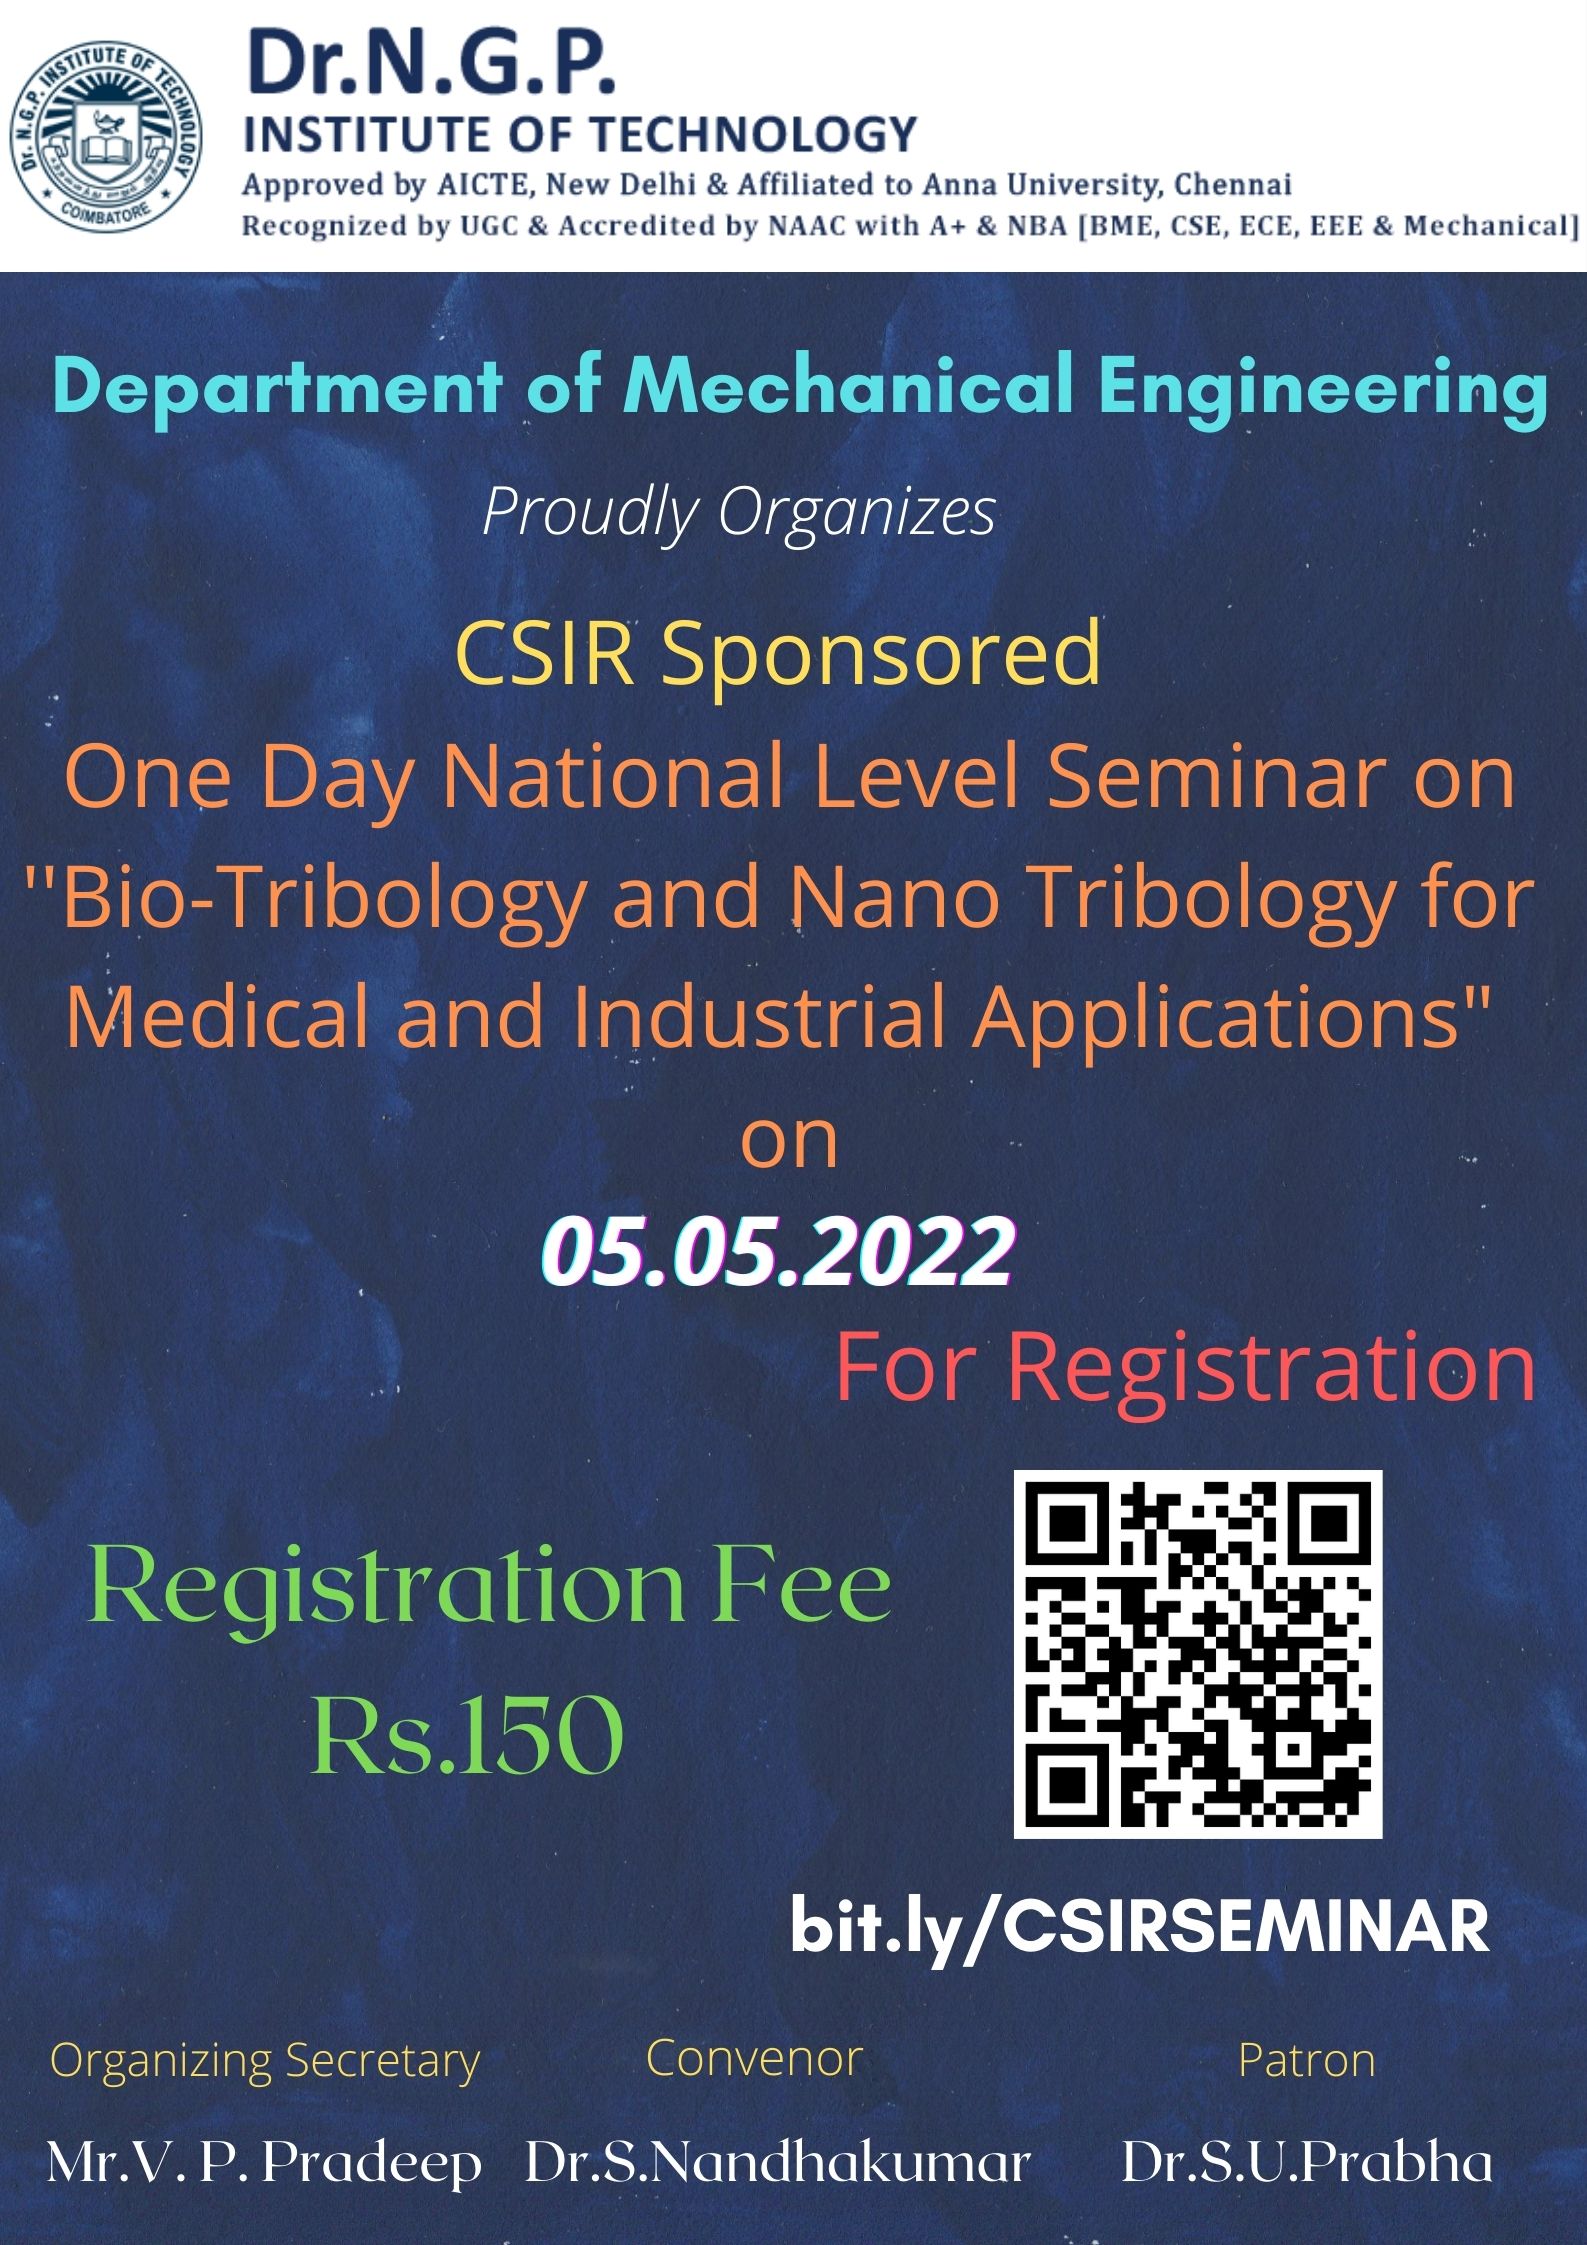 CSIR Sponsored One Day National Seminar on Bio-tribology and Nano Tribology for Medical and Industrial Applications 2022